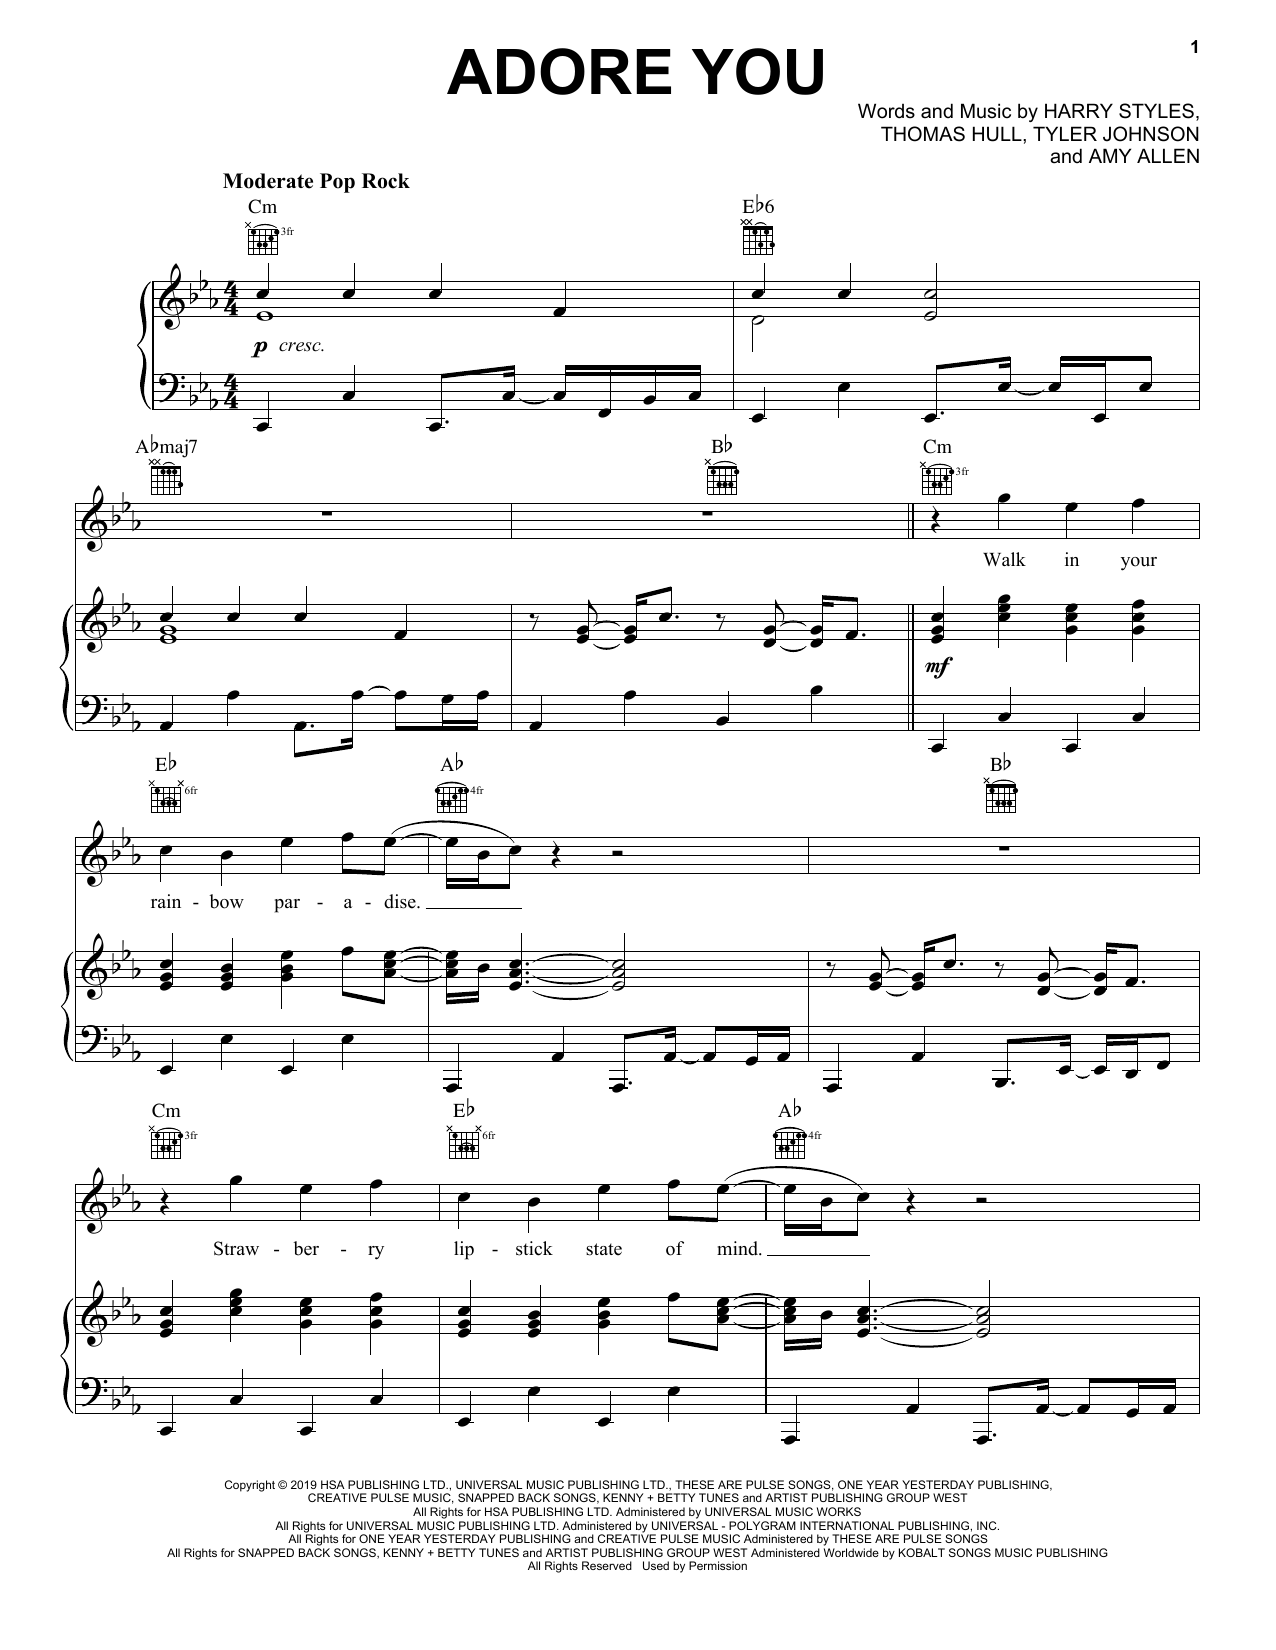 Download Harry Styles Adore You sheet music and printable PDF score & Pop music notes